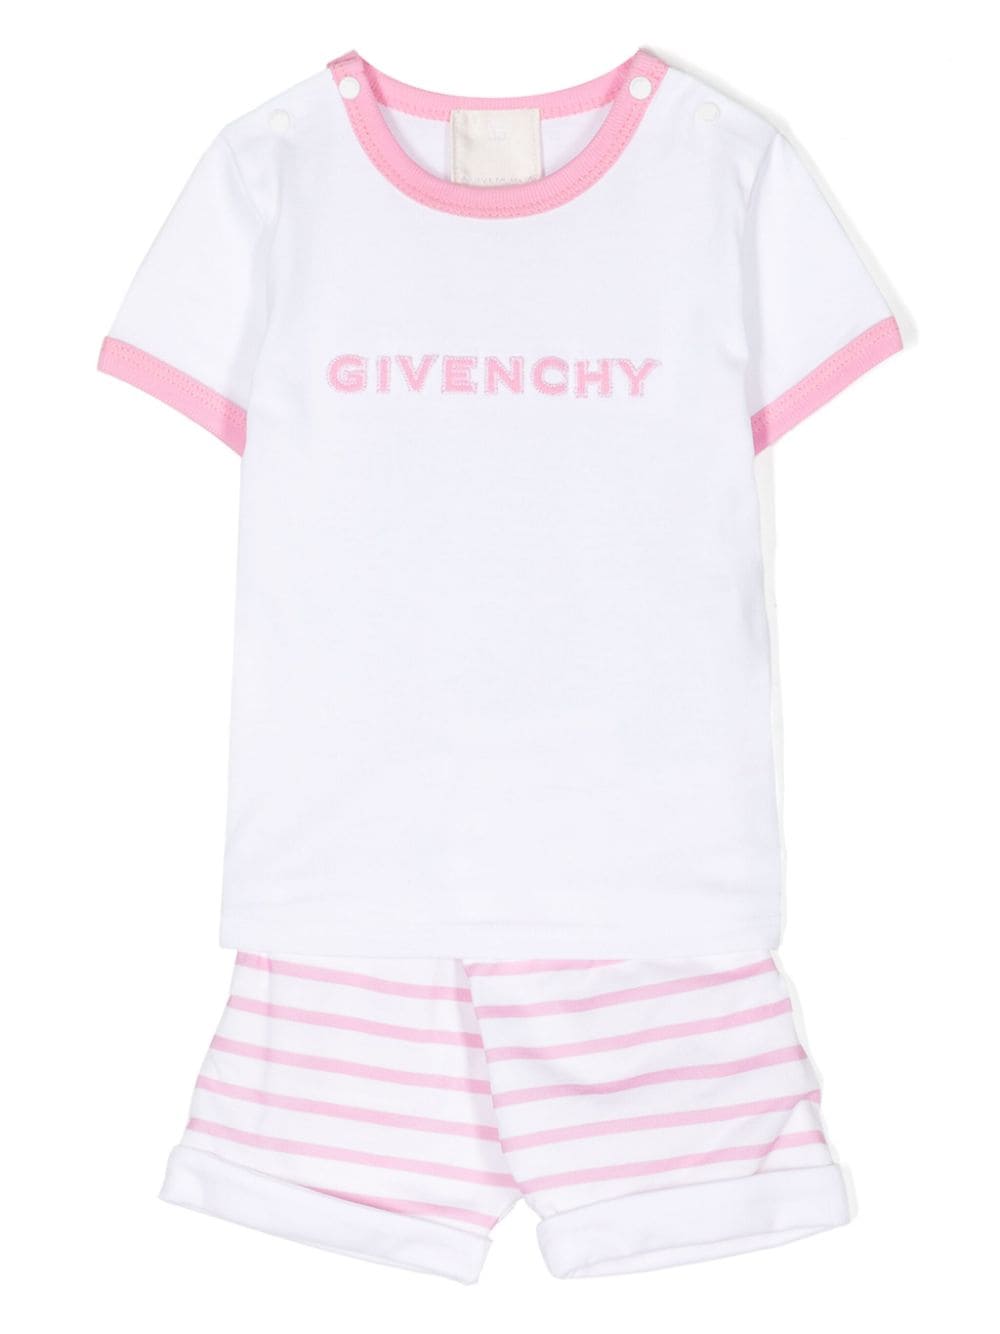 Givenchy Kids logo-embroidered T-shirt and short sets - Pink von Givenchy Kids